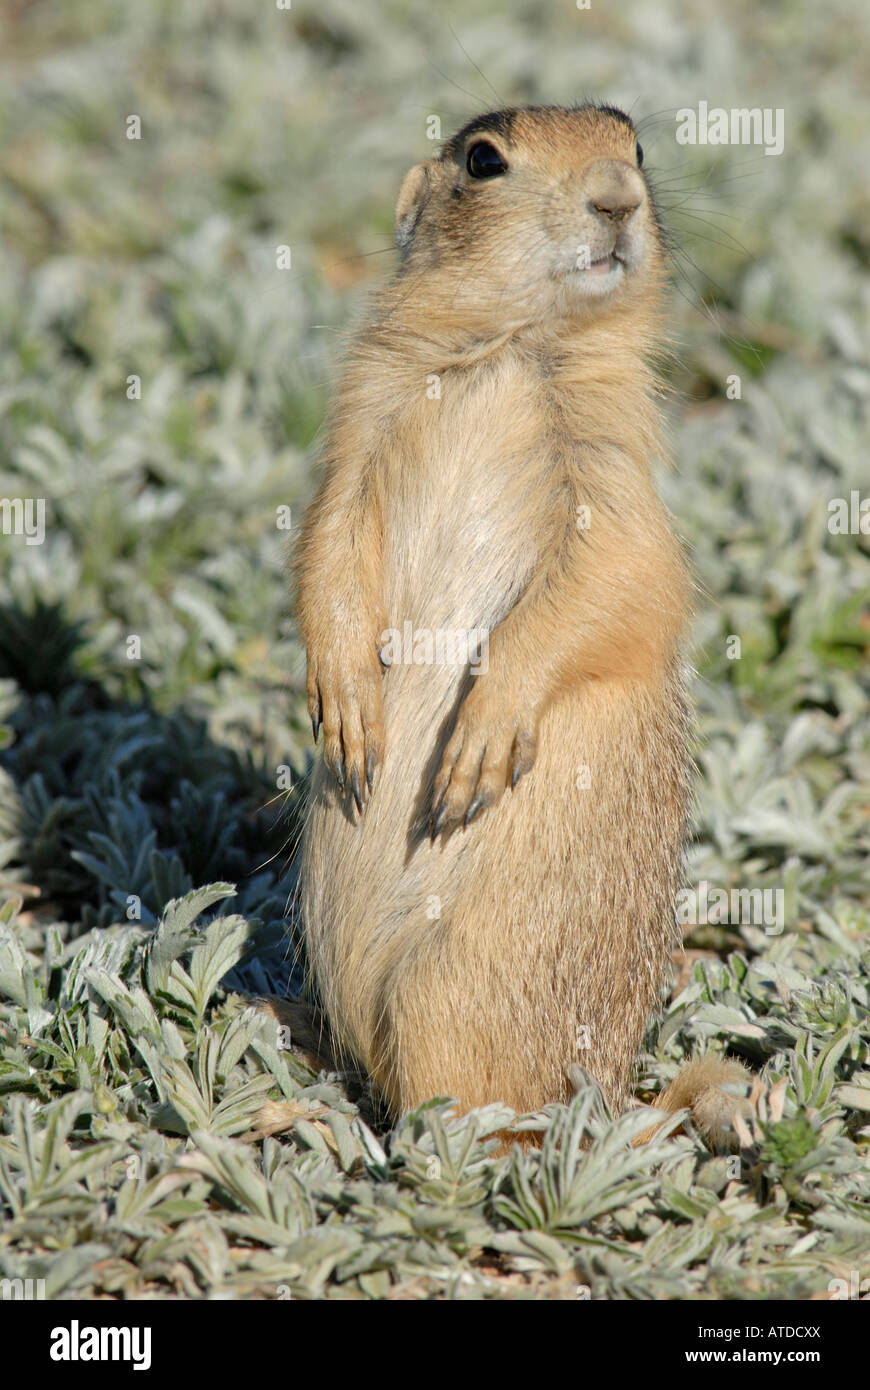 Stock photo of a young Utah prairie dog standing upright. Stock Photo